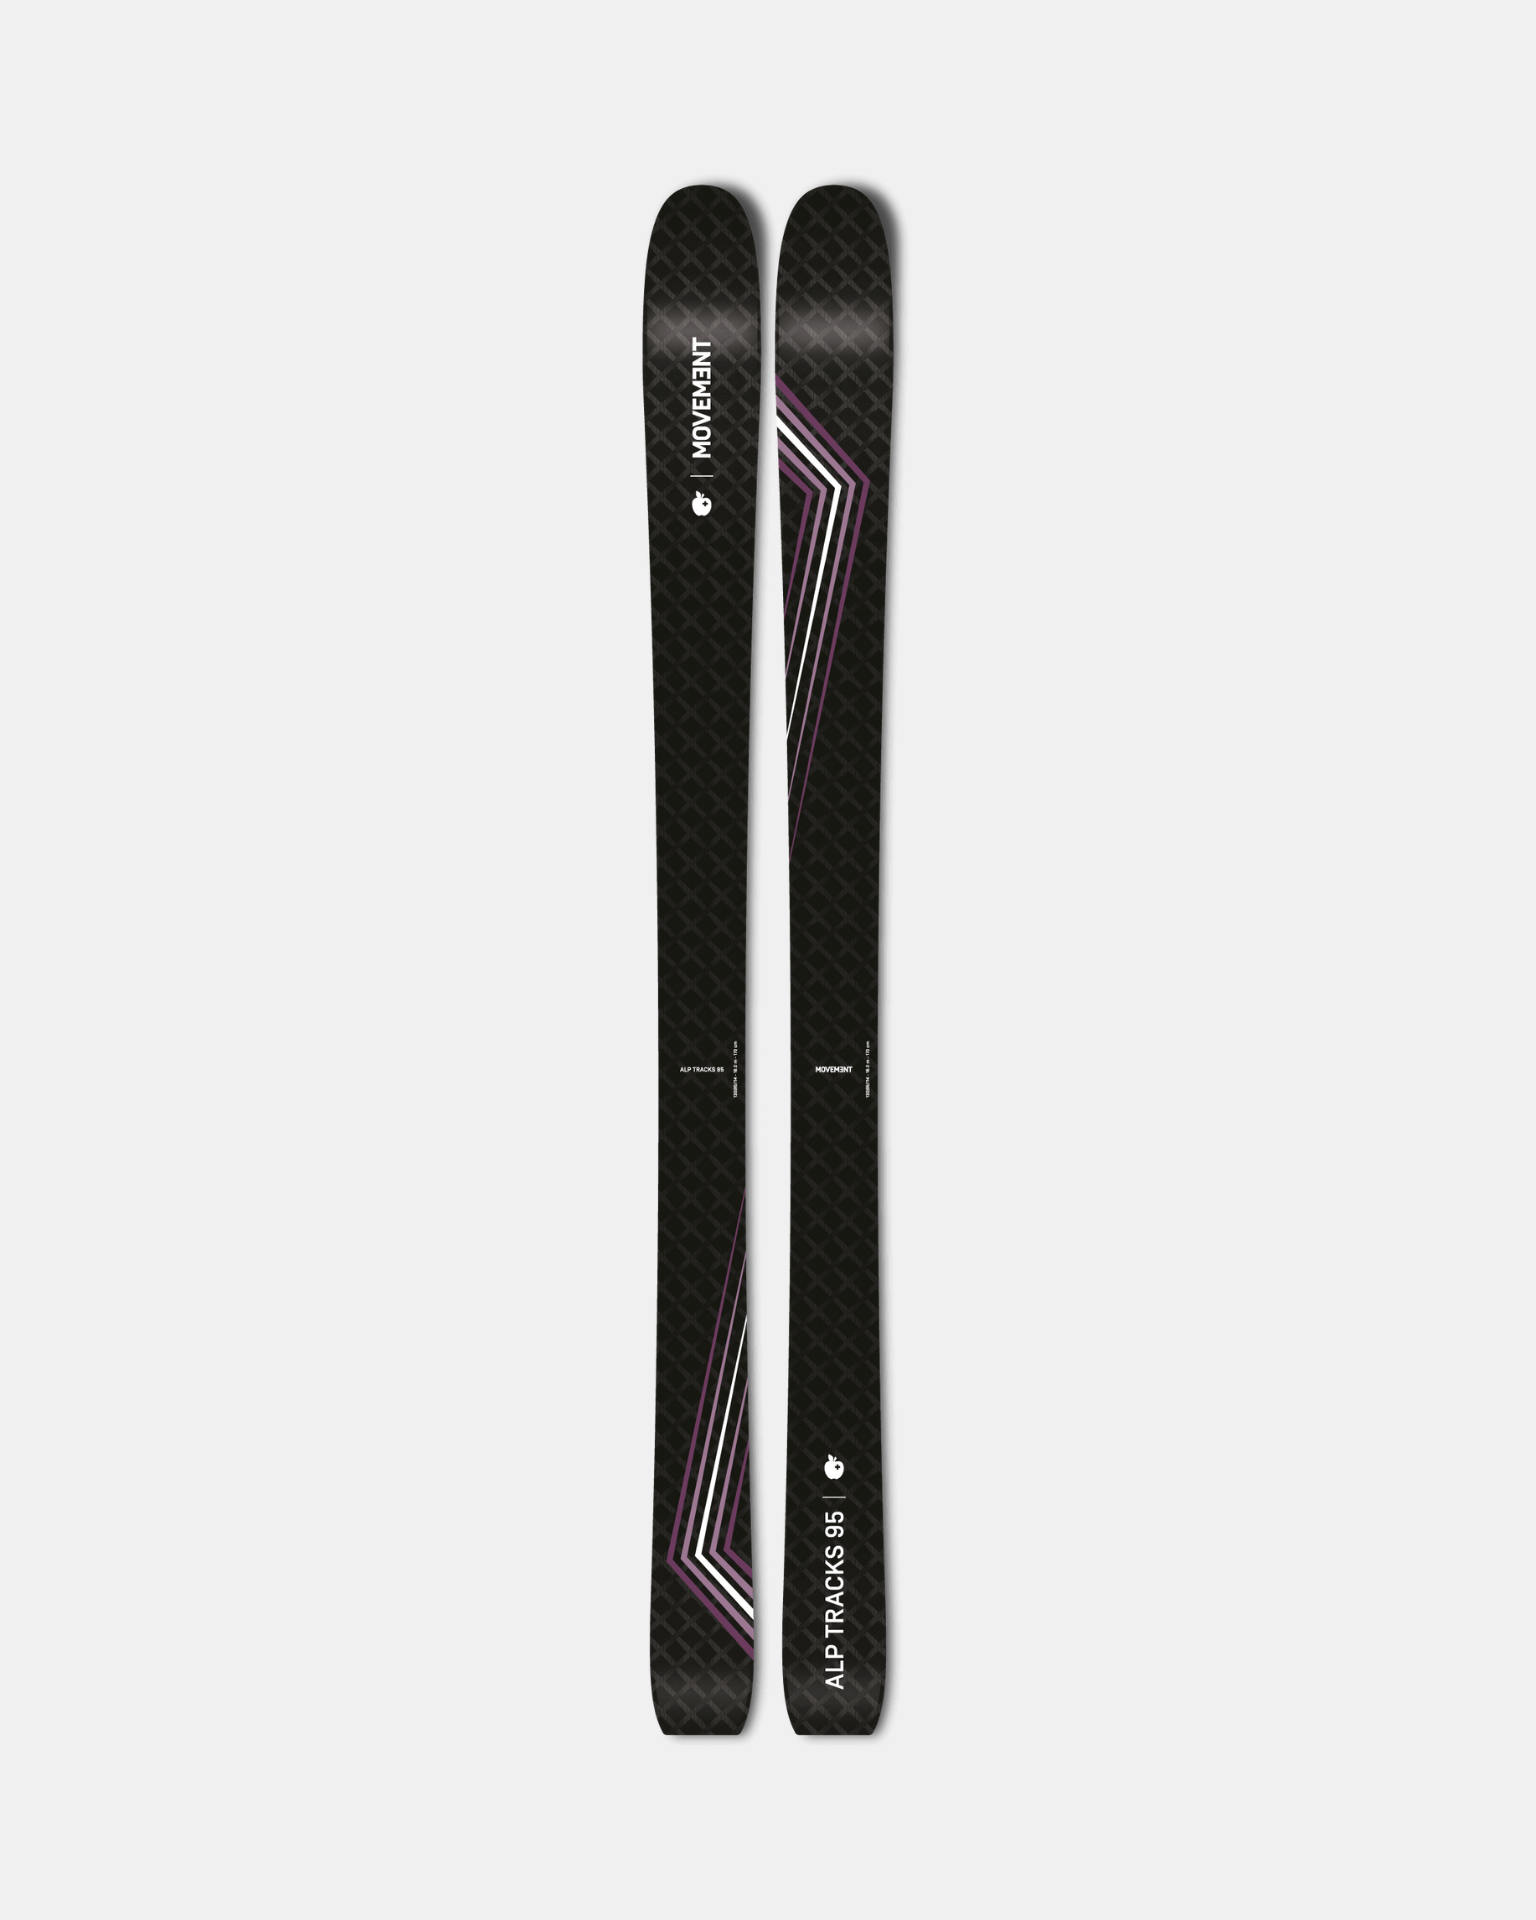 Embrace the mountains with my trusted companions, Movement's Alp Tracks 95 Women's skis.